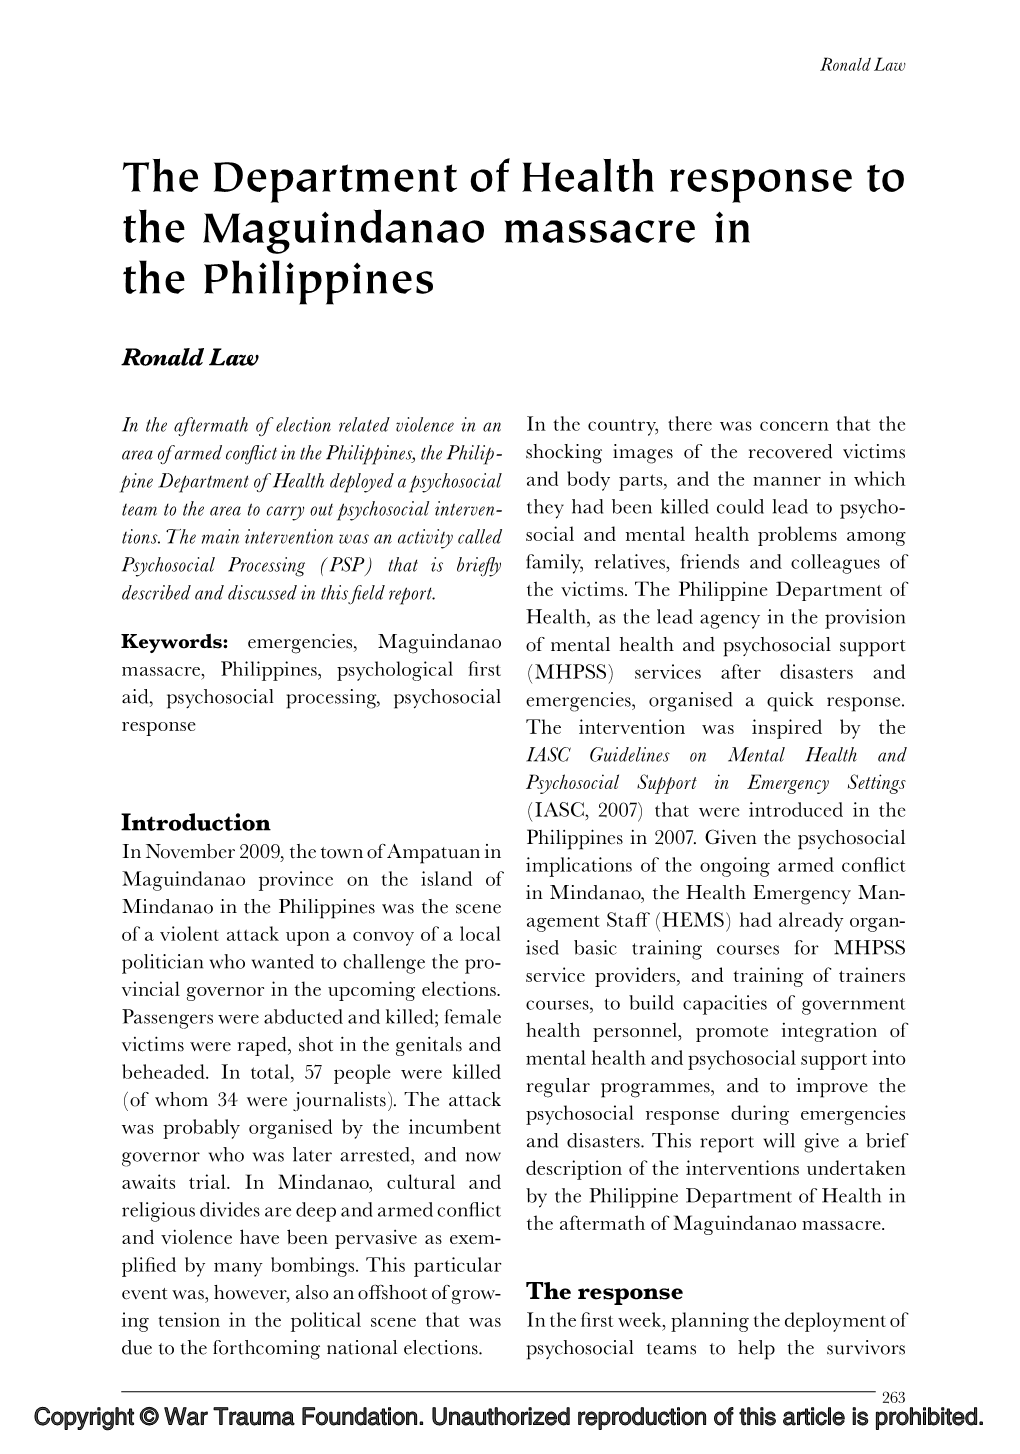 The Department of Health Response to the Maguindanao Massacre in the Philippines